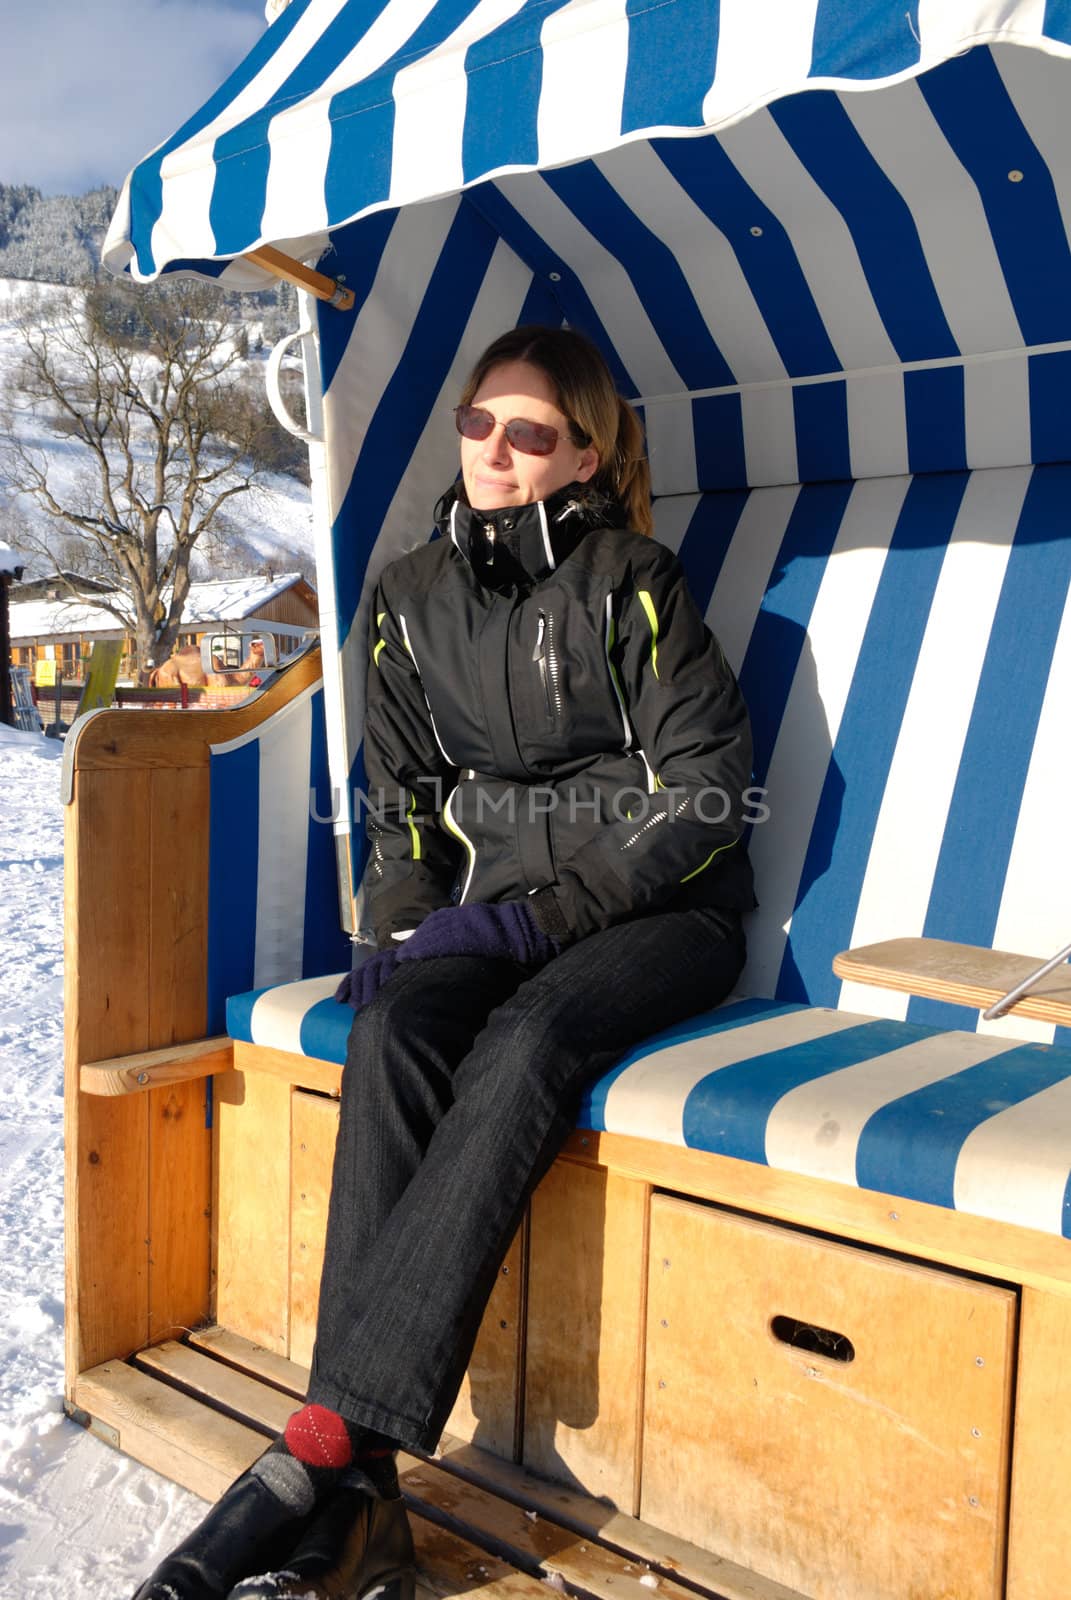 Young woman relaxing in roofed wicker beach chair on a sunny winter day in austria.